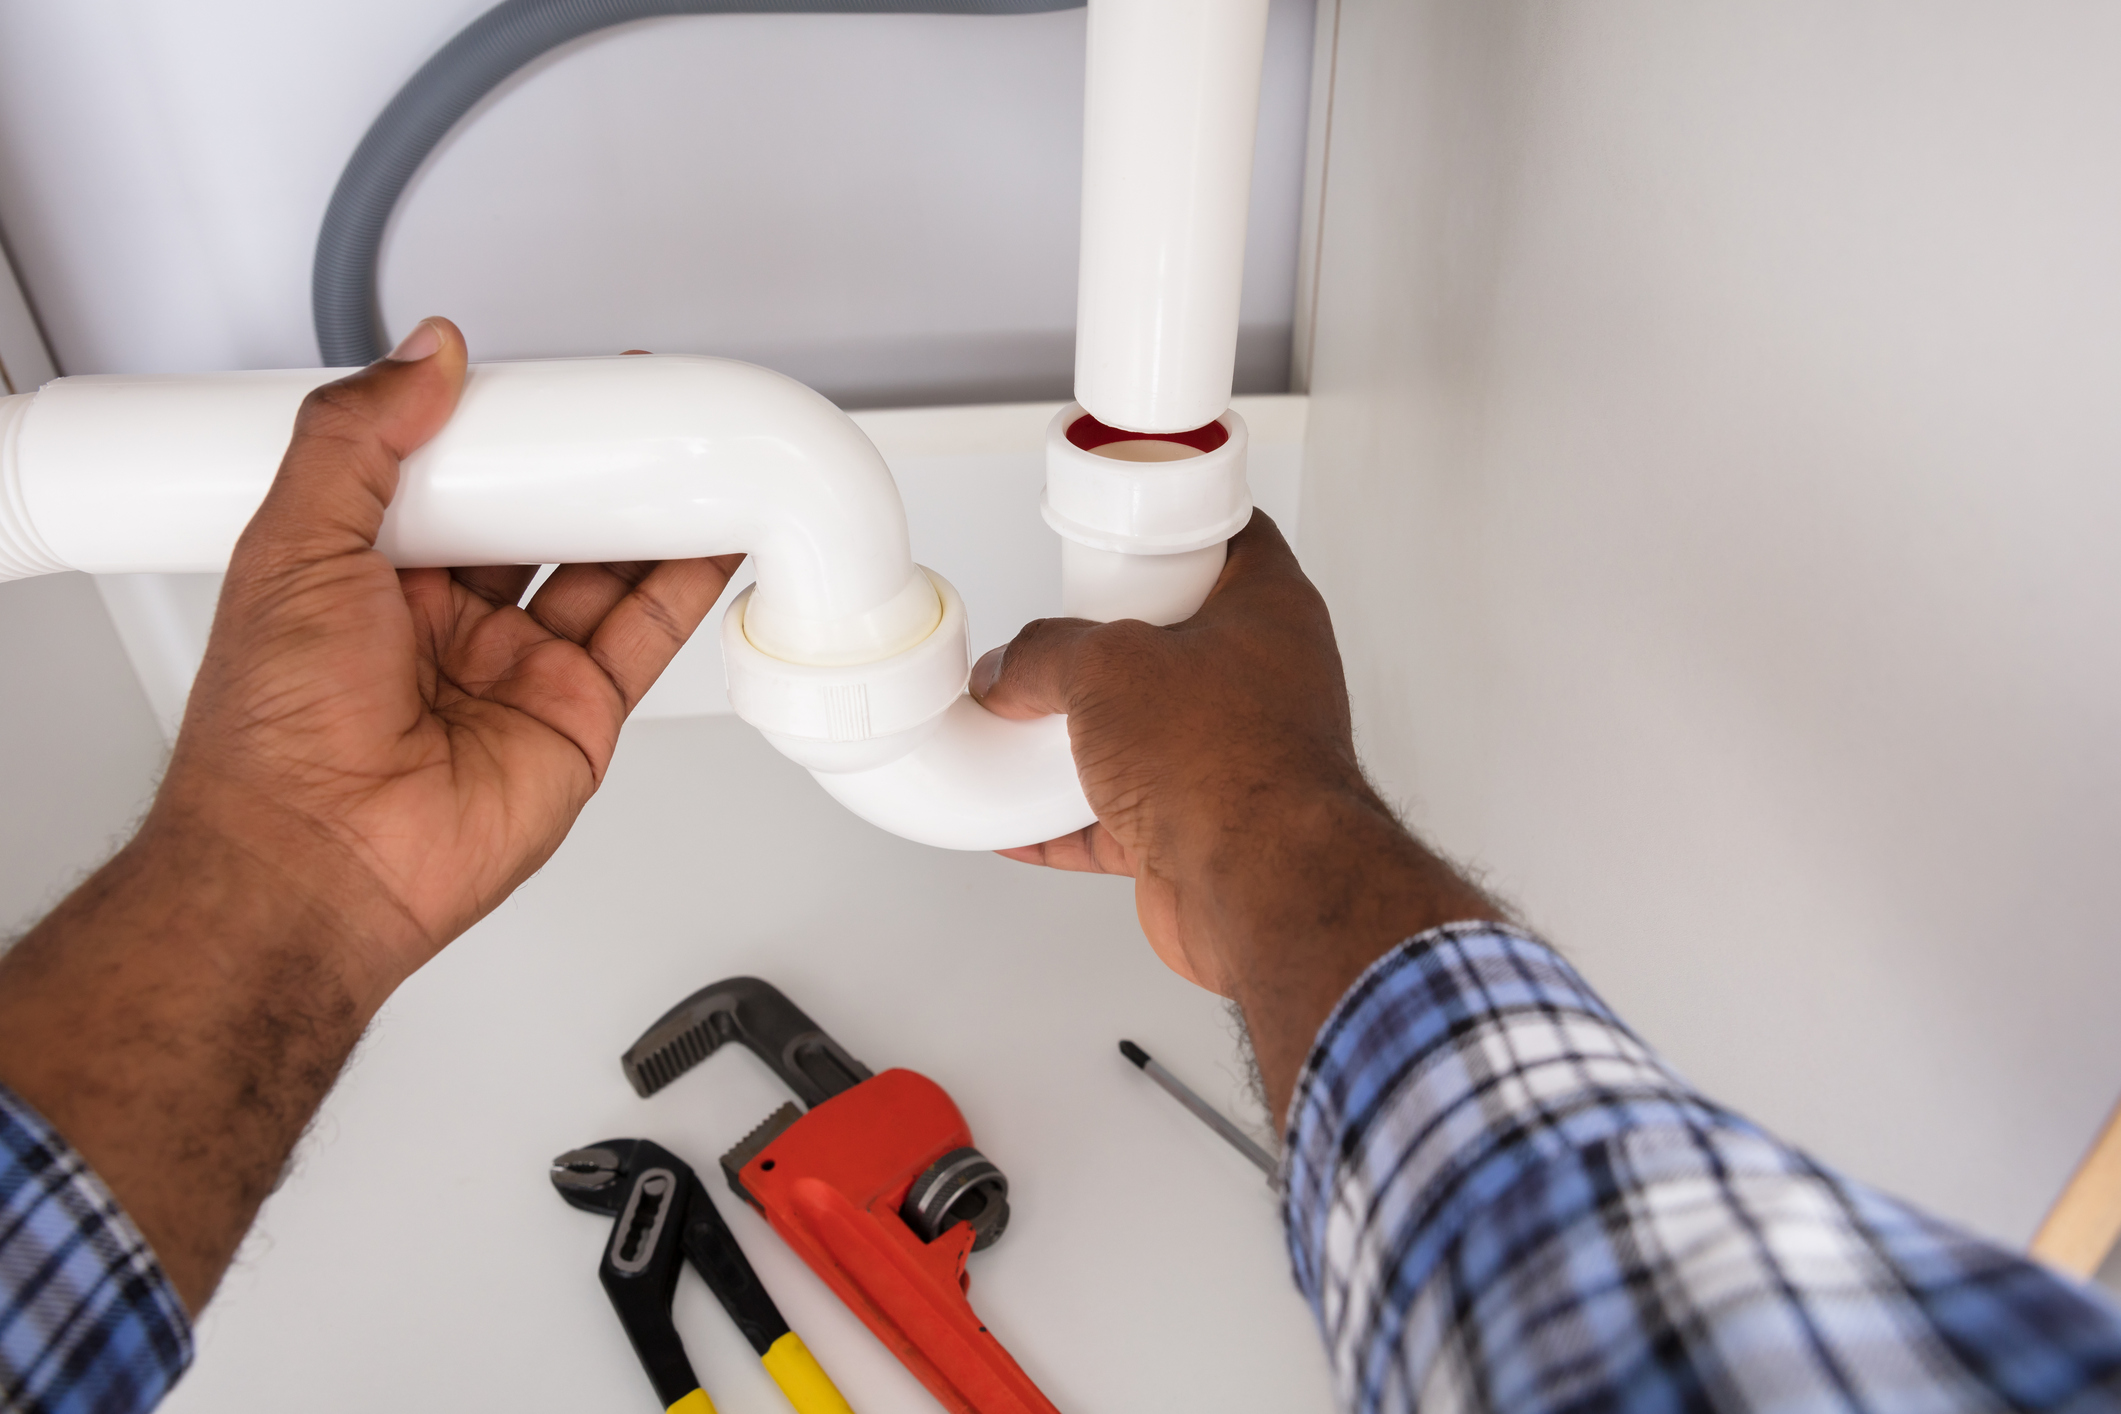 Plumber replacing piping under a sink